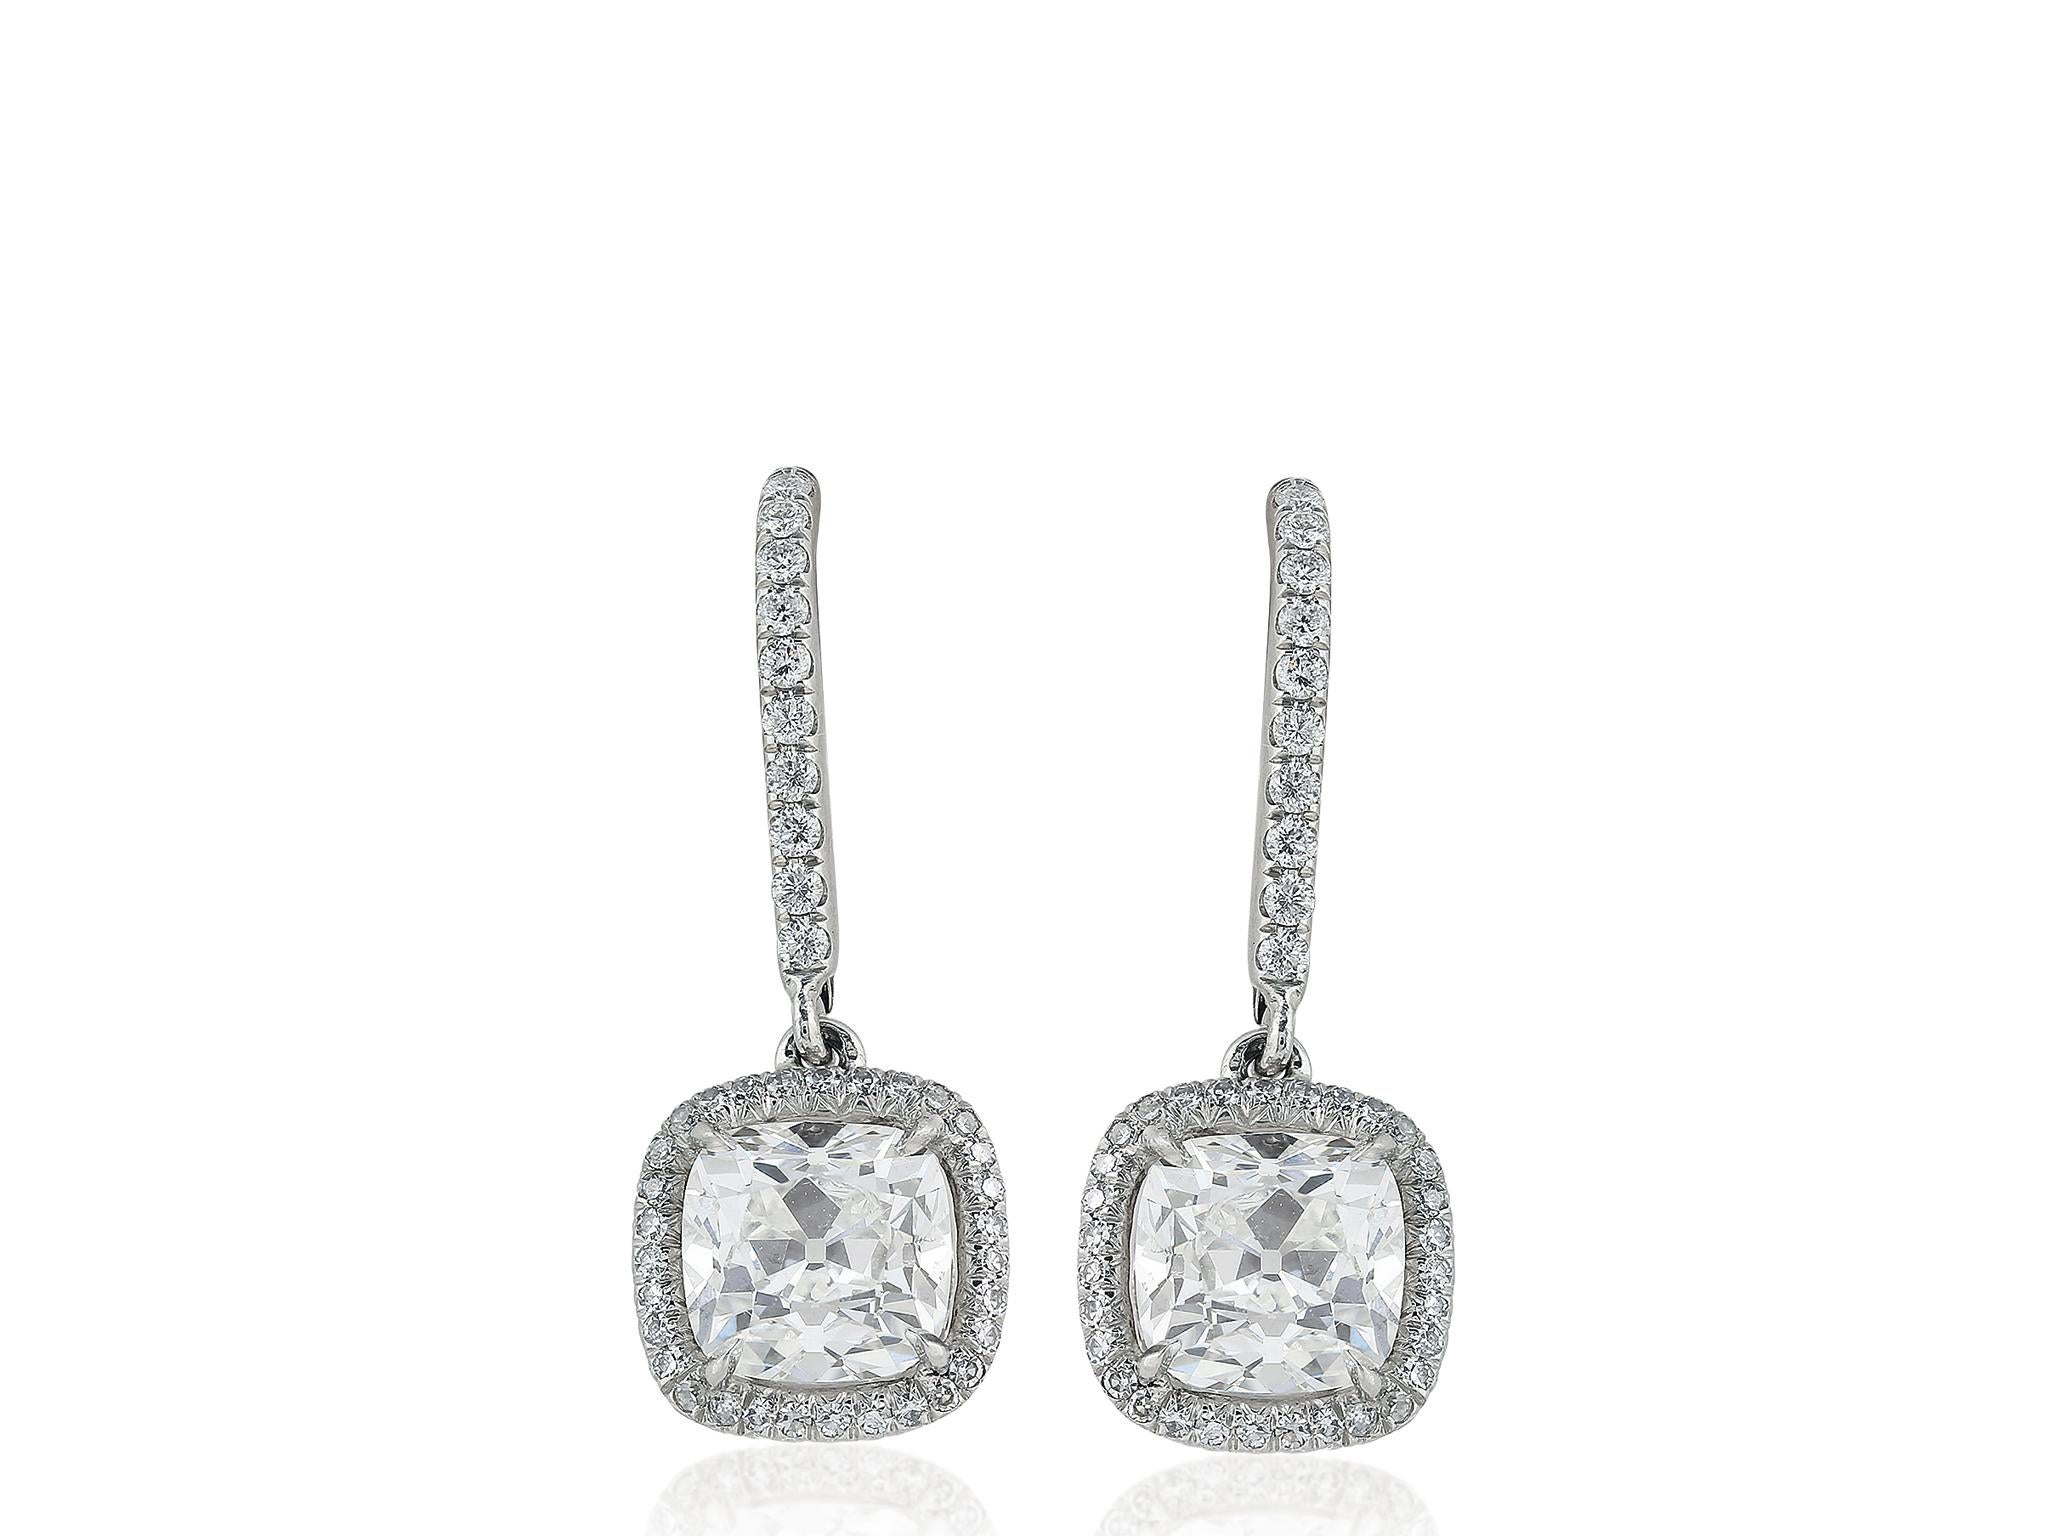 3.68 Carat Weight Cushion Cut Diamond Drop Earrings Platinum In New Condition For Sale In Chestnut Hill, MA